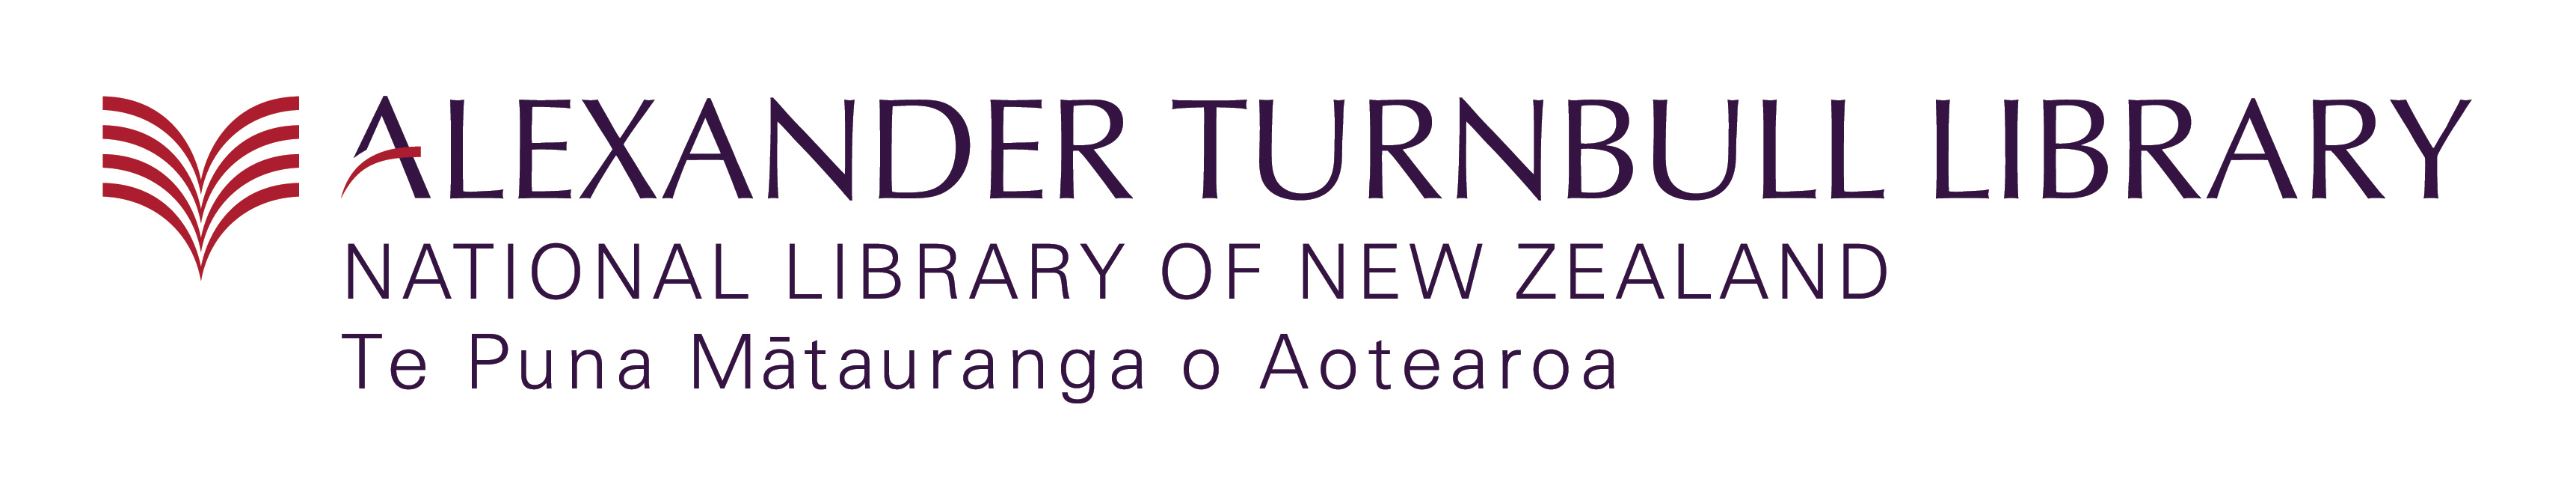 The Alexander Turnbull Library, National Library of New Zealand